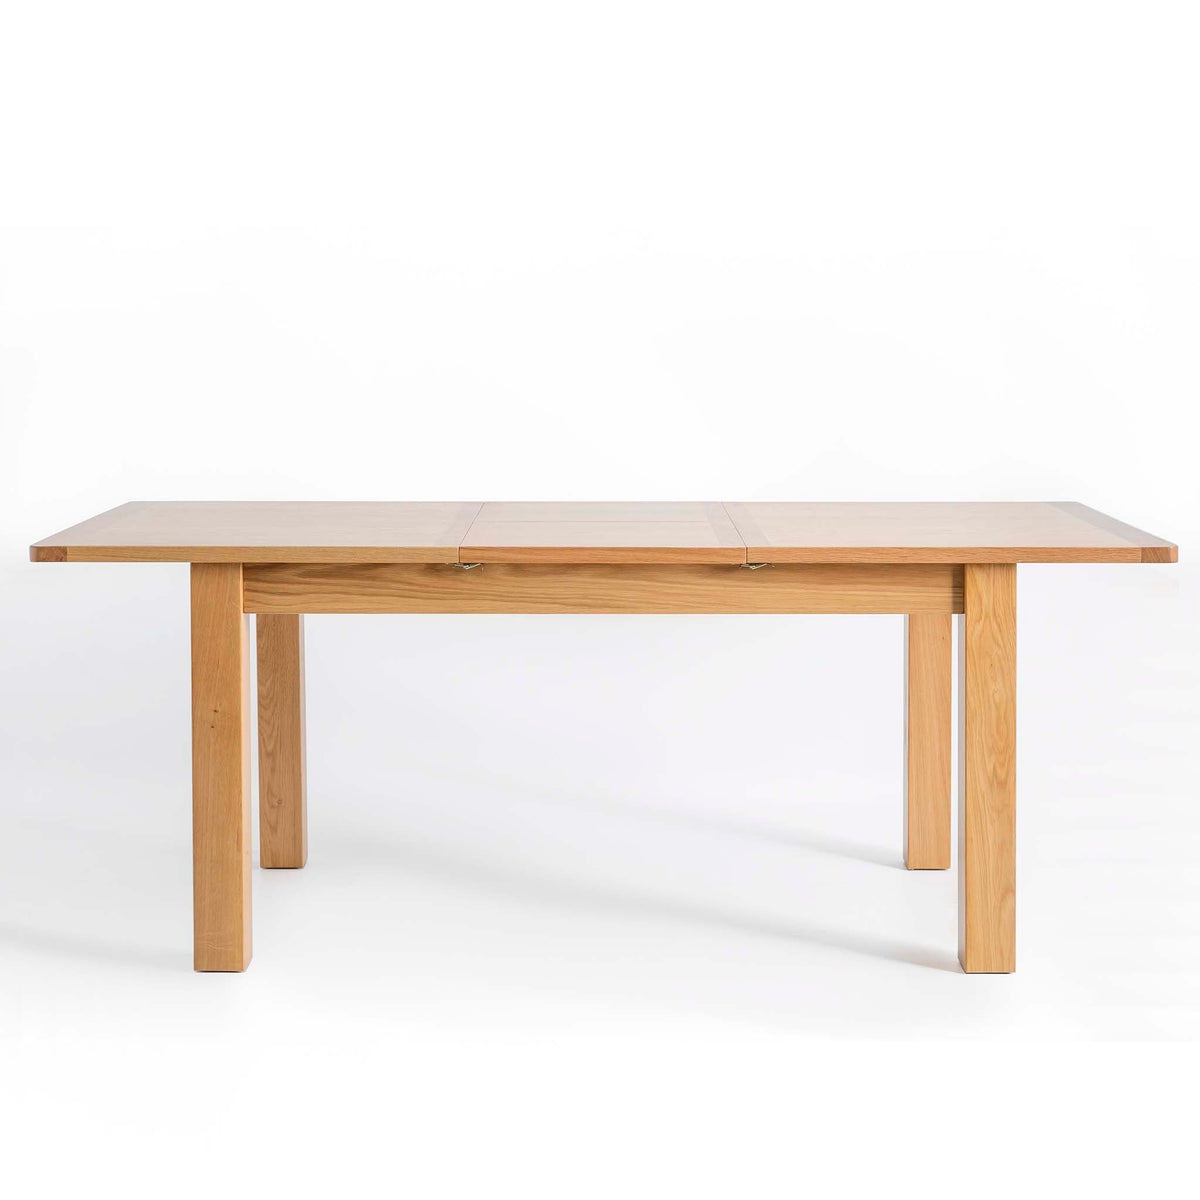 Hampshire Oak Small Extending Dining Table - Fully extended